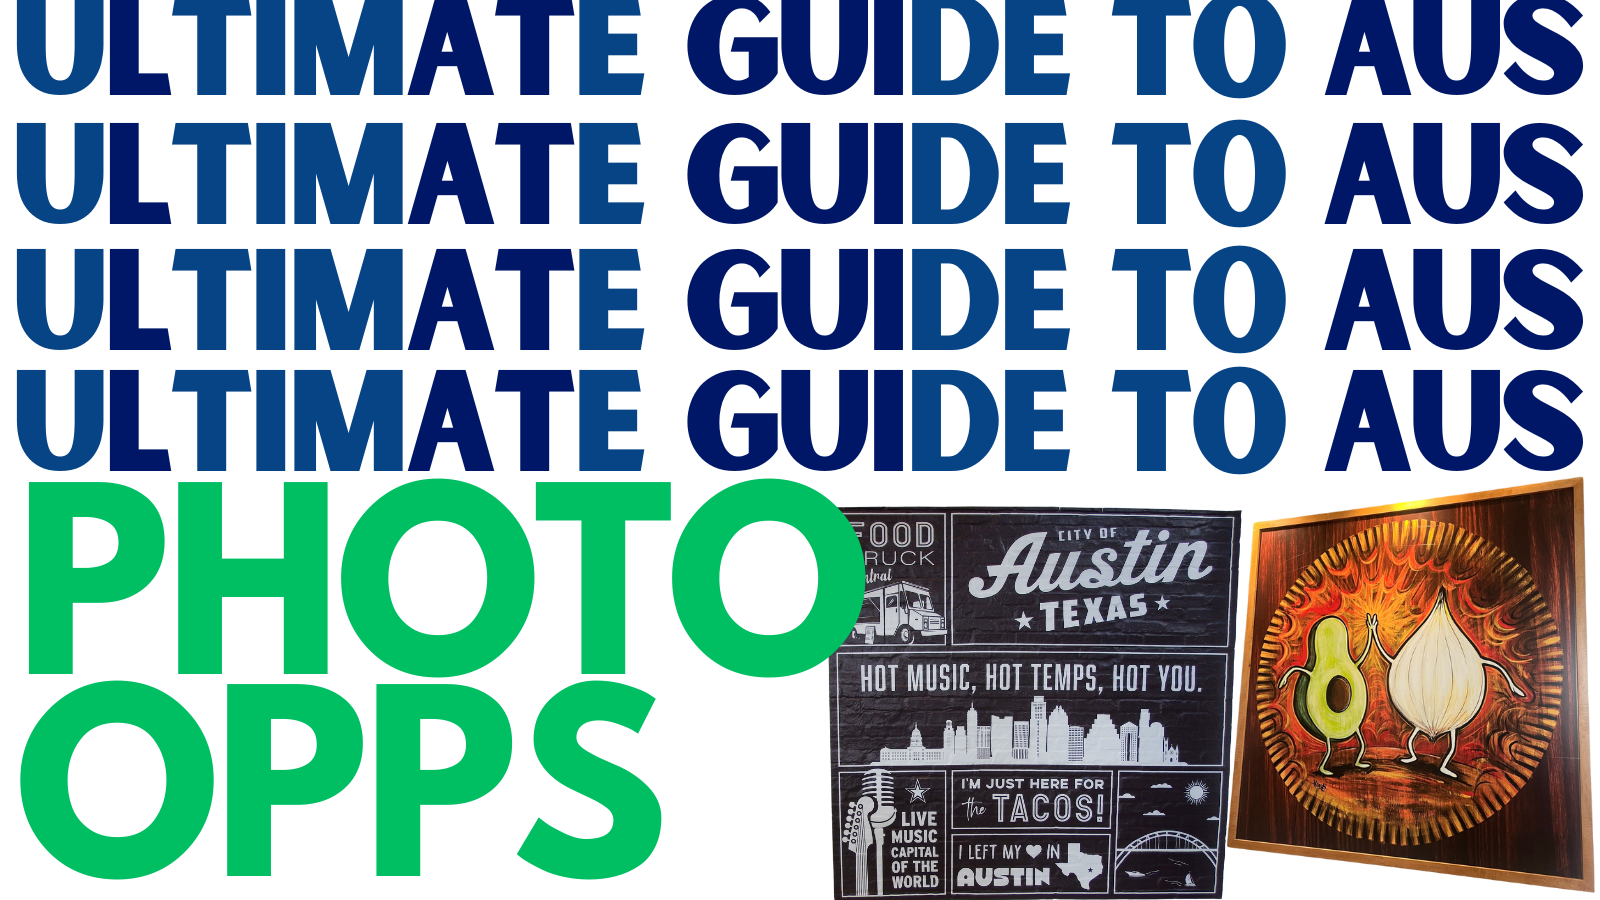 Text reads: "Ultimate guide to AUS: Photo opps" with photos of a mural and painting at AUS.